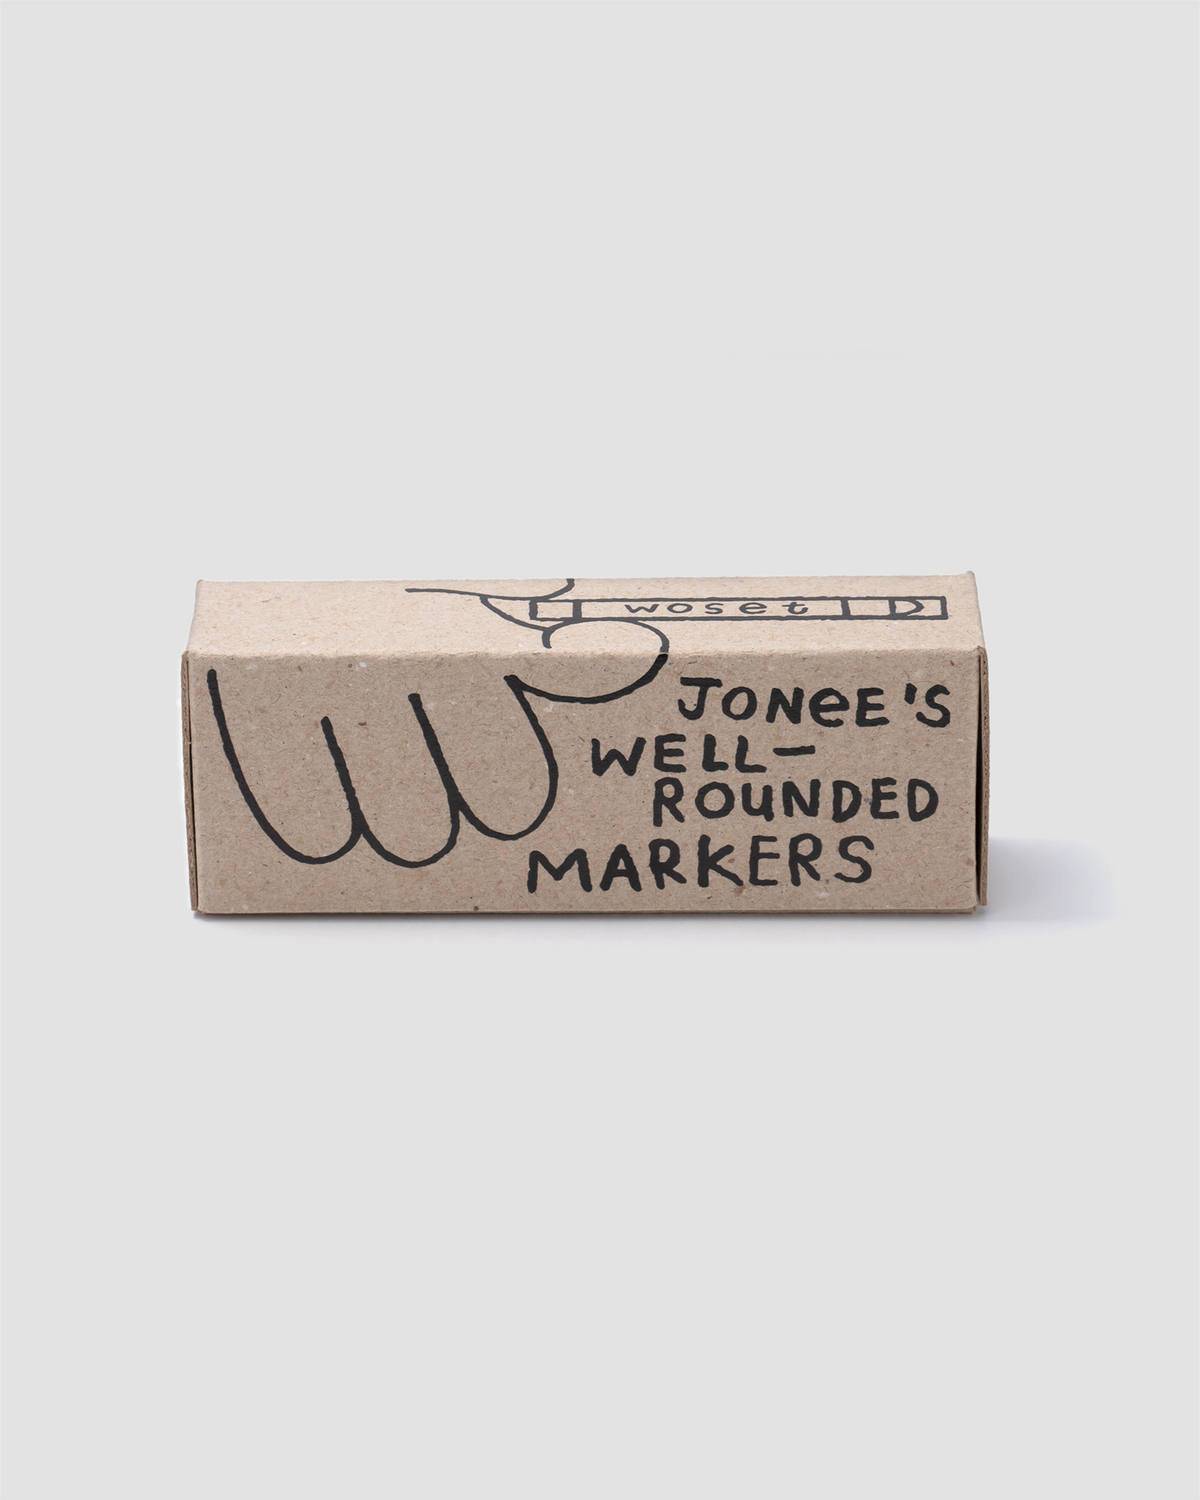 Jonee's Well Rounded Markers